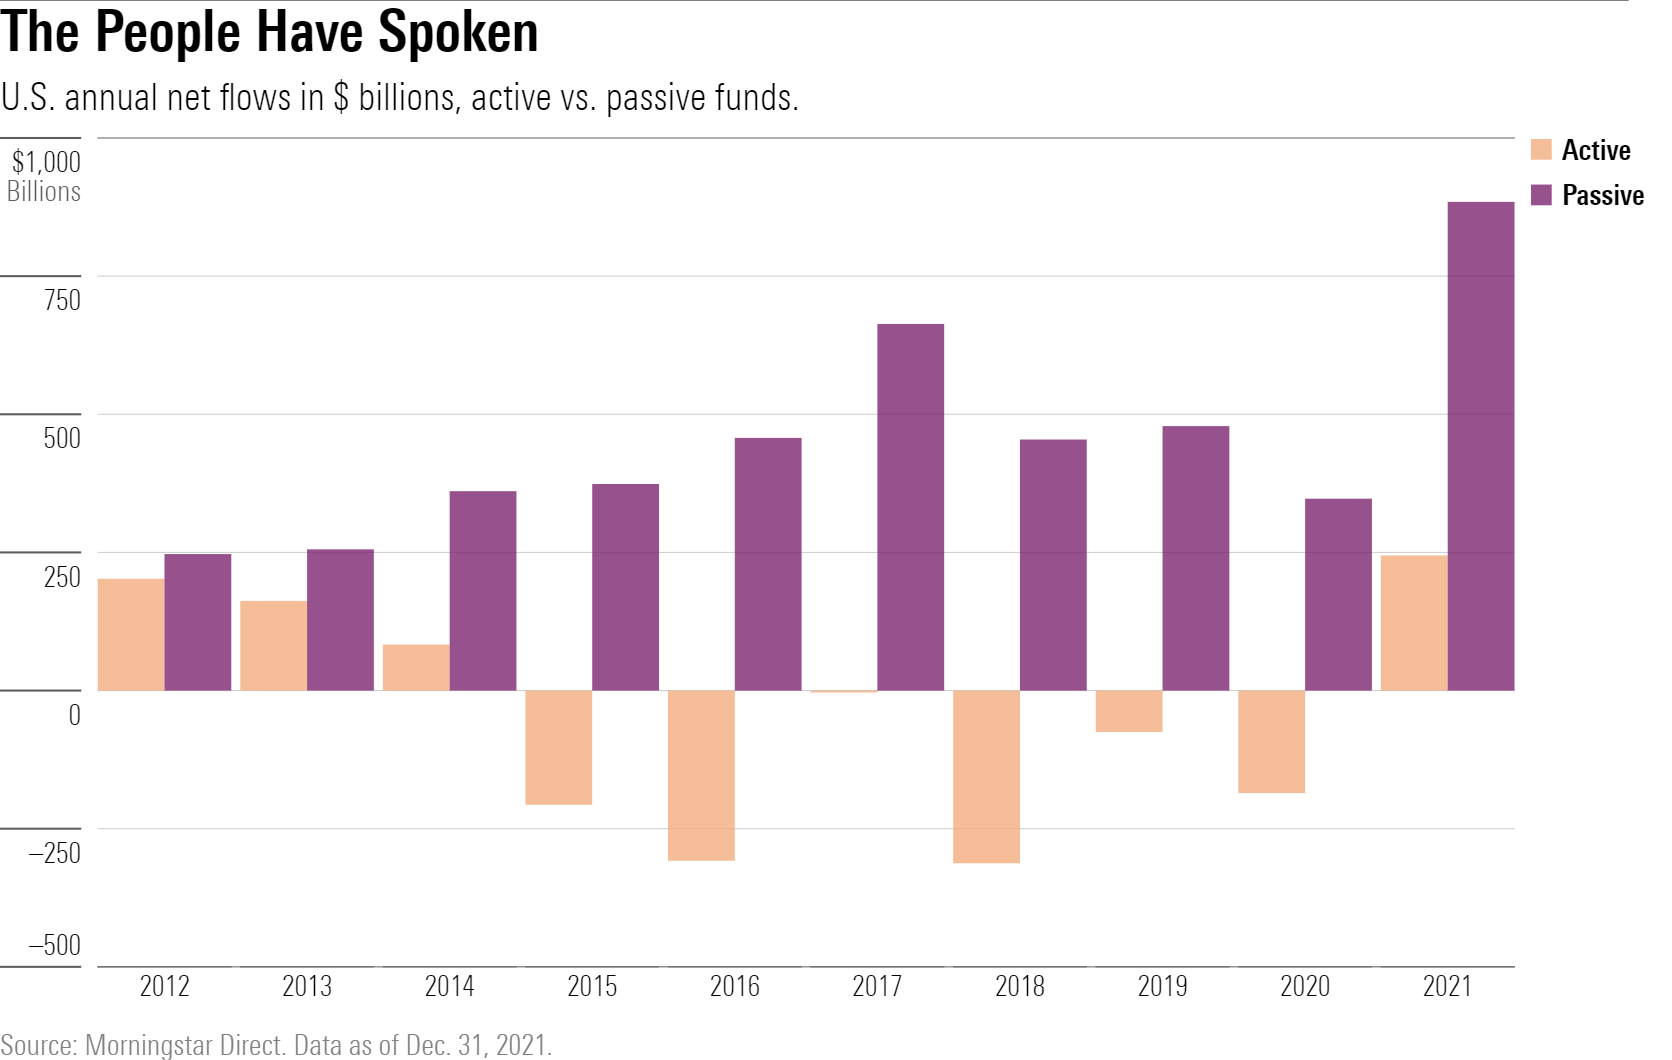 chart shows annual net flows into passive funds (in purple) vs. active funds (in orange), and their dominance for the last 11 years.